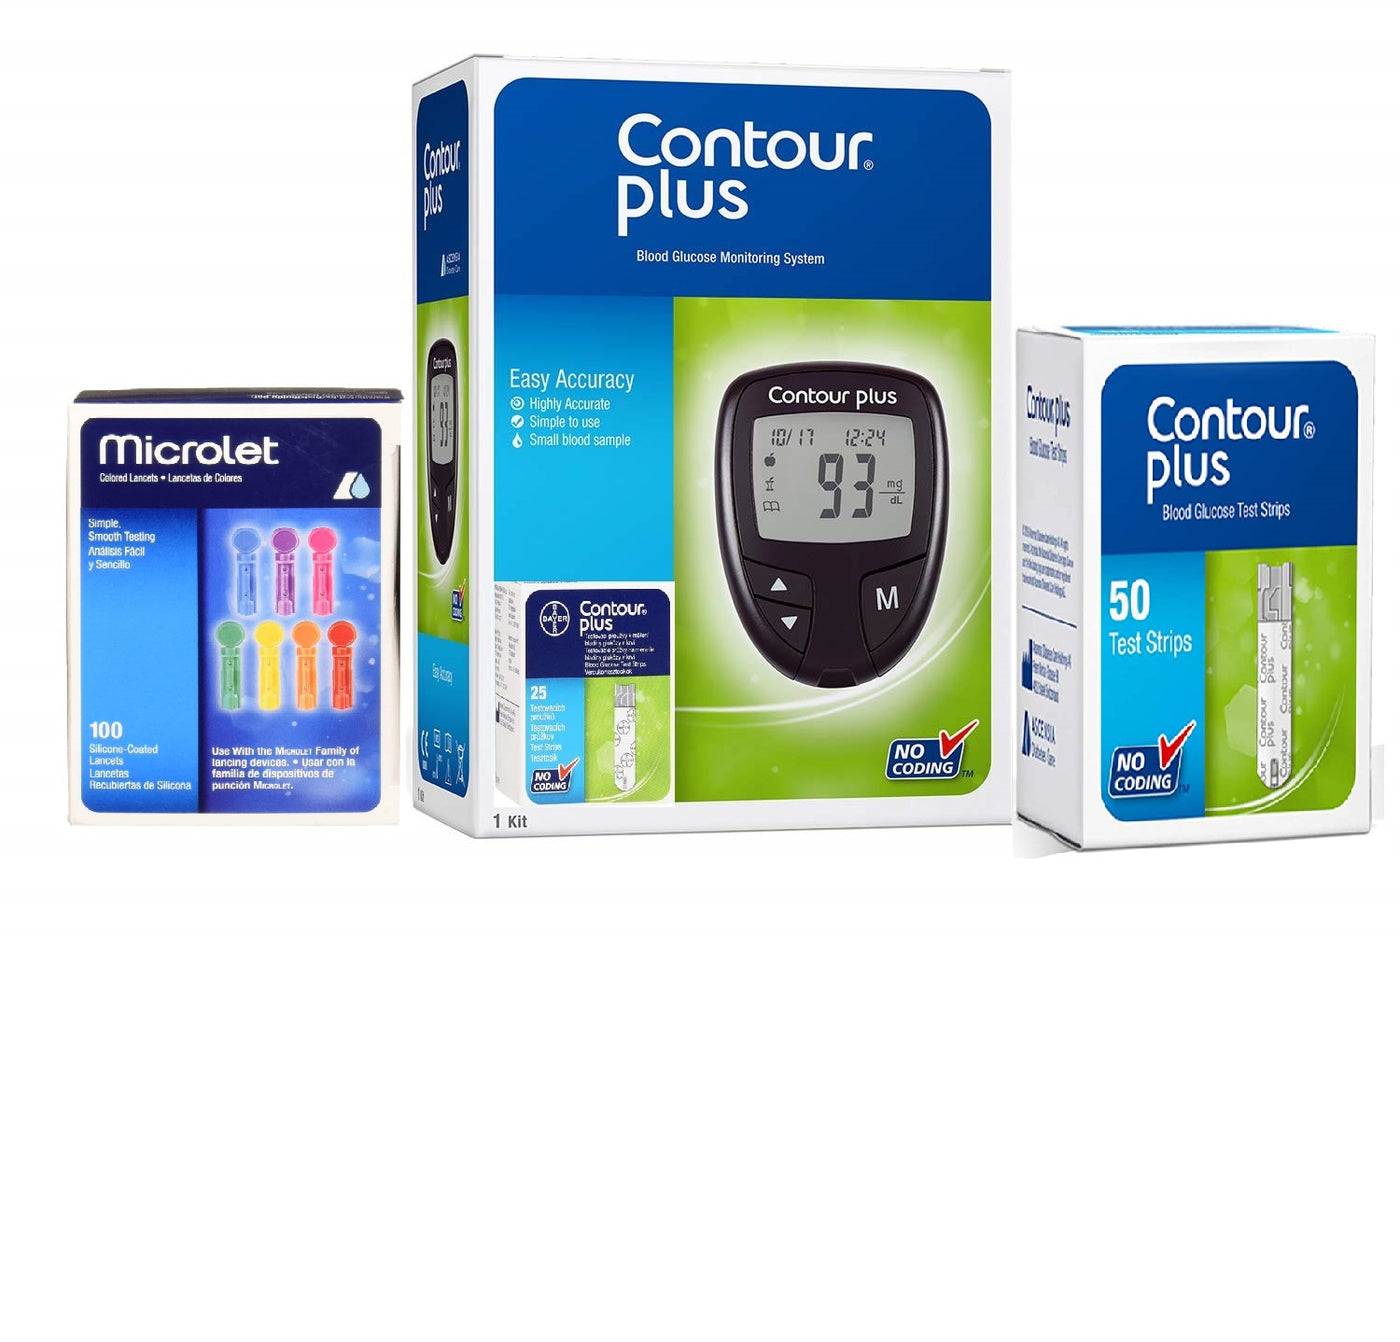 Contour Plus Glucometer (Free 25 Strips + 50 Strips + 100 Microlet Colored Lancets )